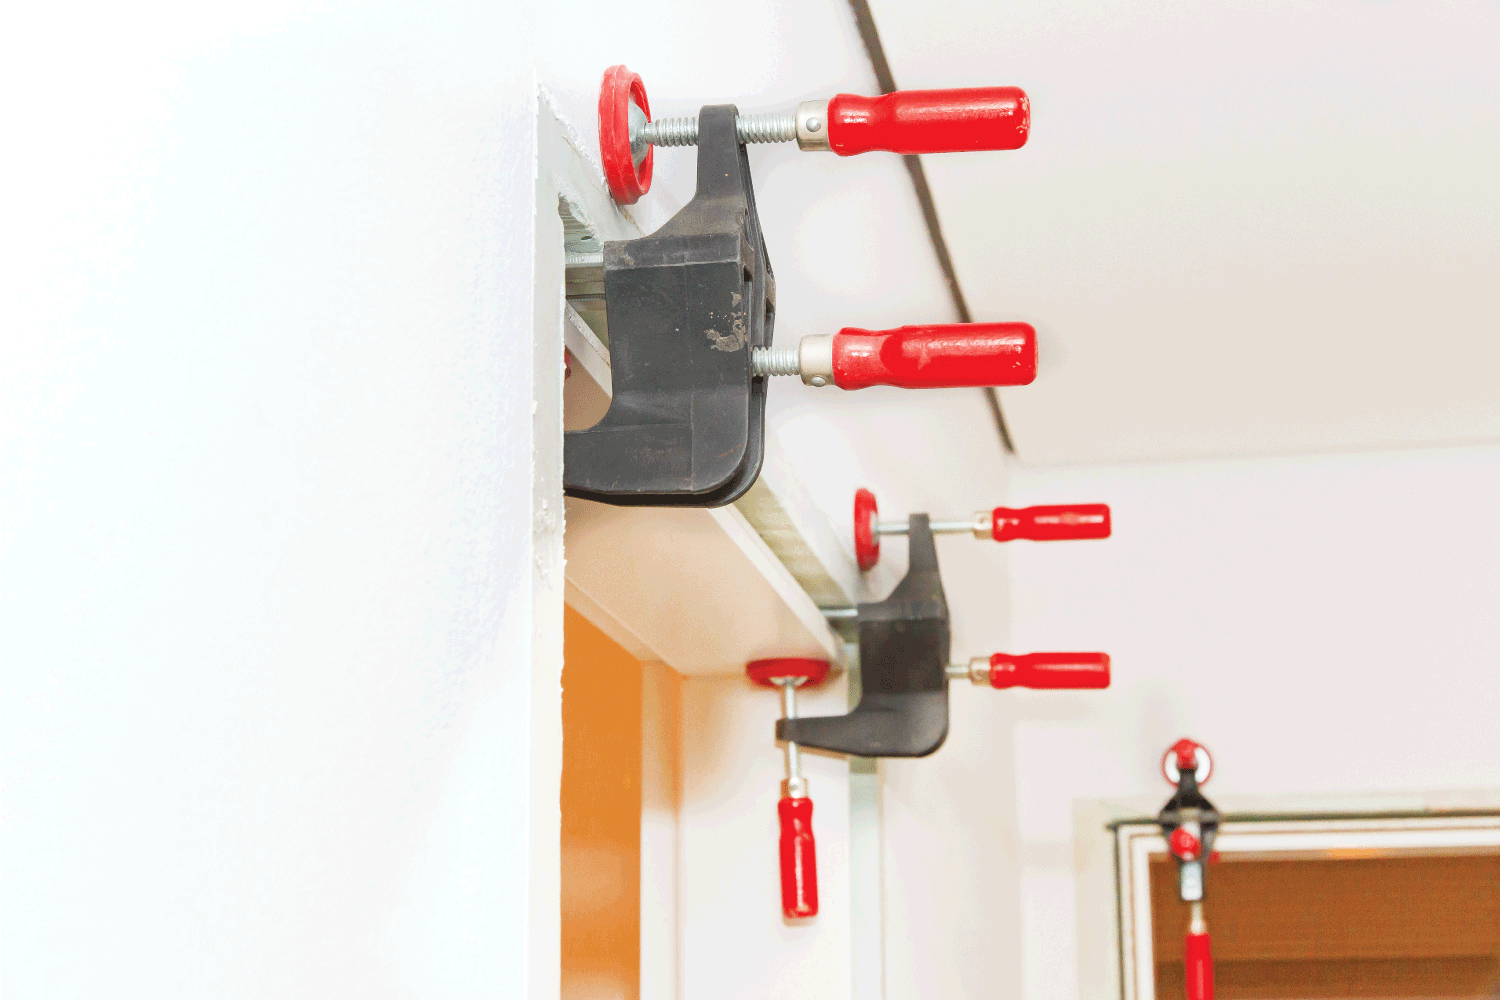 bar clamps holding up door jamb for installation to concrete wall